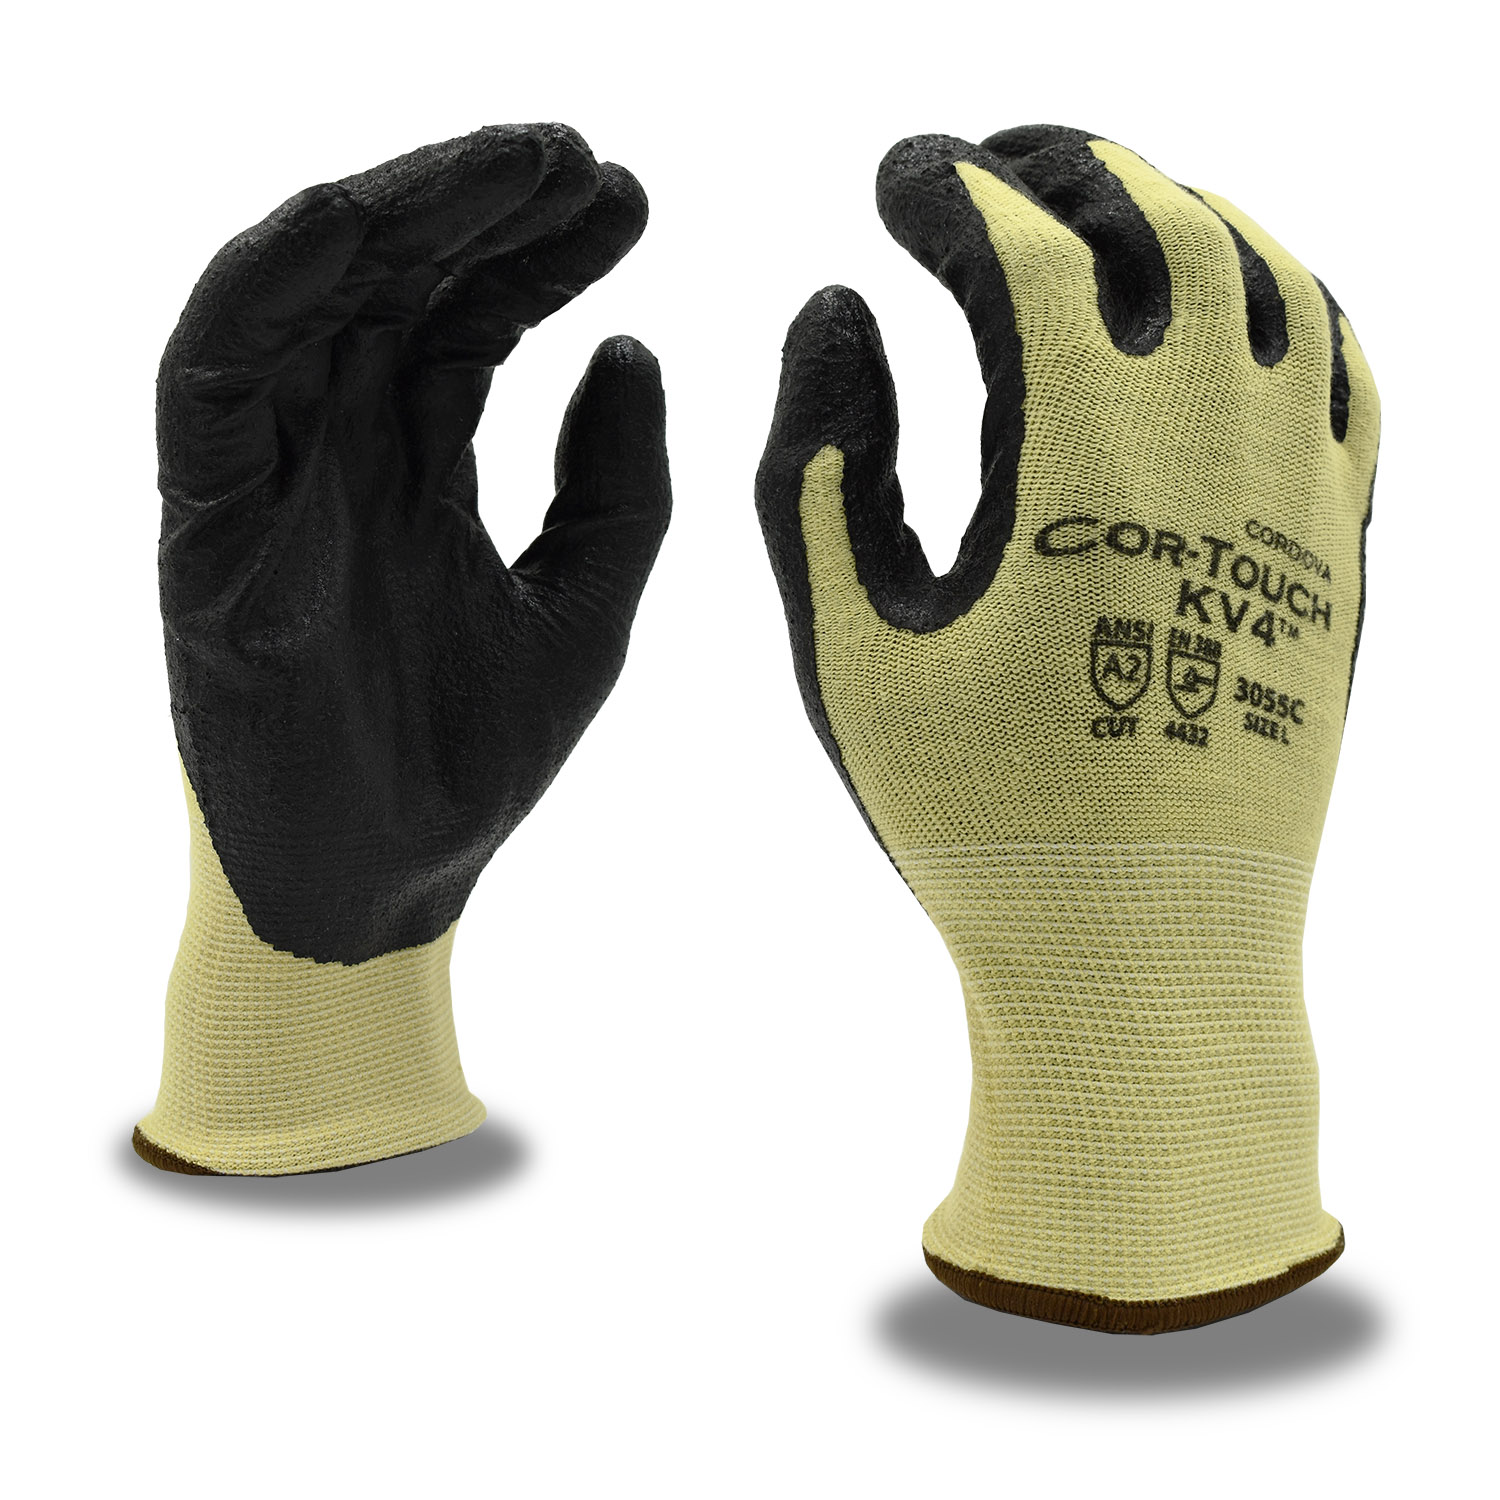 COR-TOUCH KV4 NITRILE PALM COATED - Cut Resistant Gloves